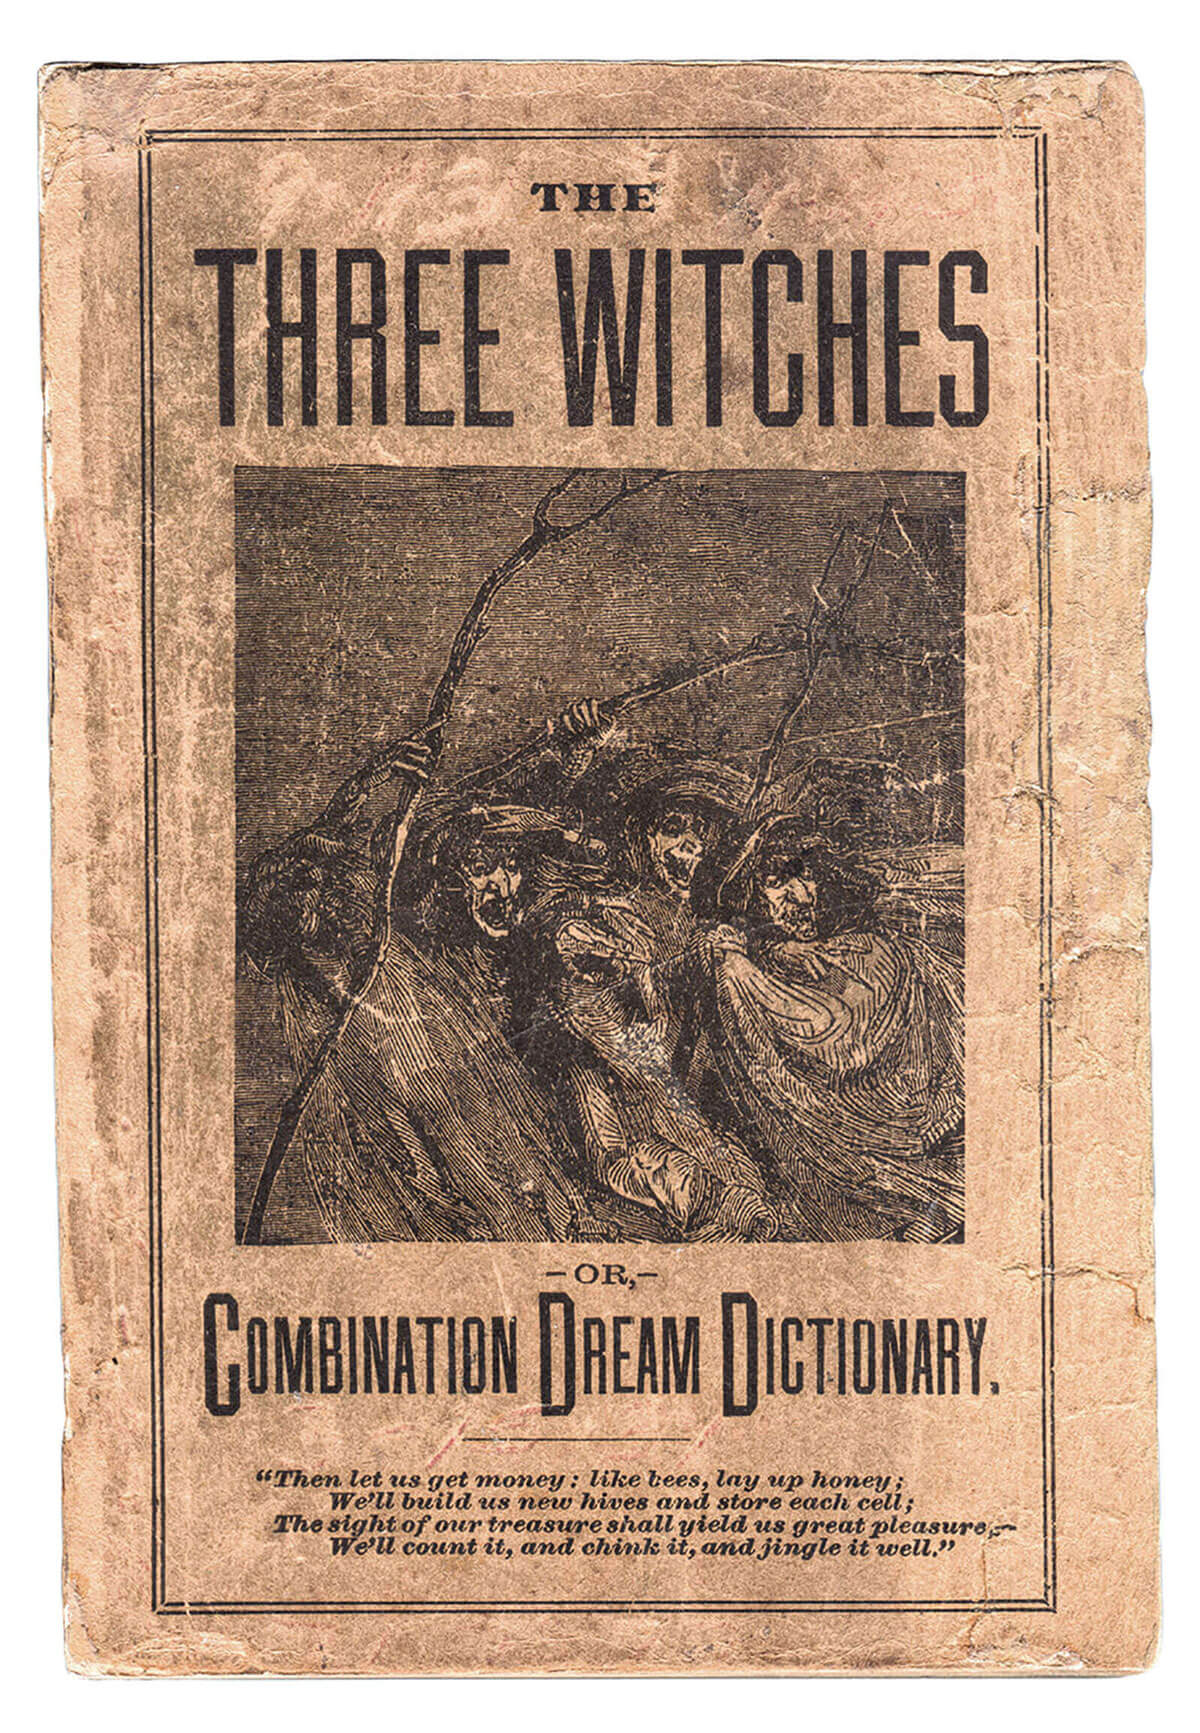 A page from the eighteen eighty-seven book entitled “The Three Witches—or,—Combination Dream Dictionary.” Rather than dispensing any dream interpretation, the book assigned lucky numbers to each entry; numbers which depended on the city in which the dreamer lived.